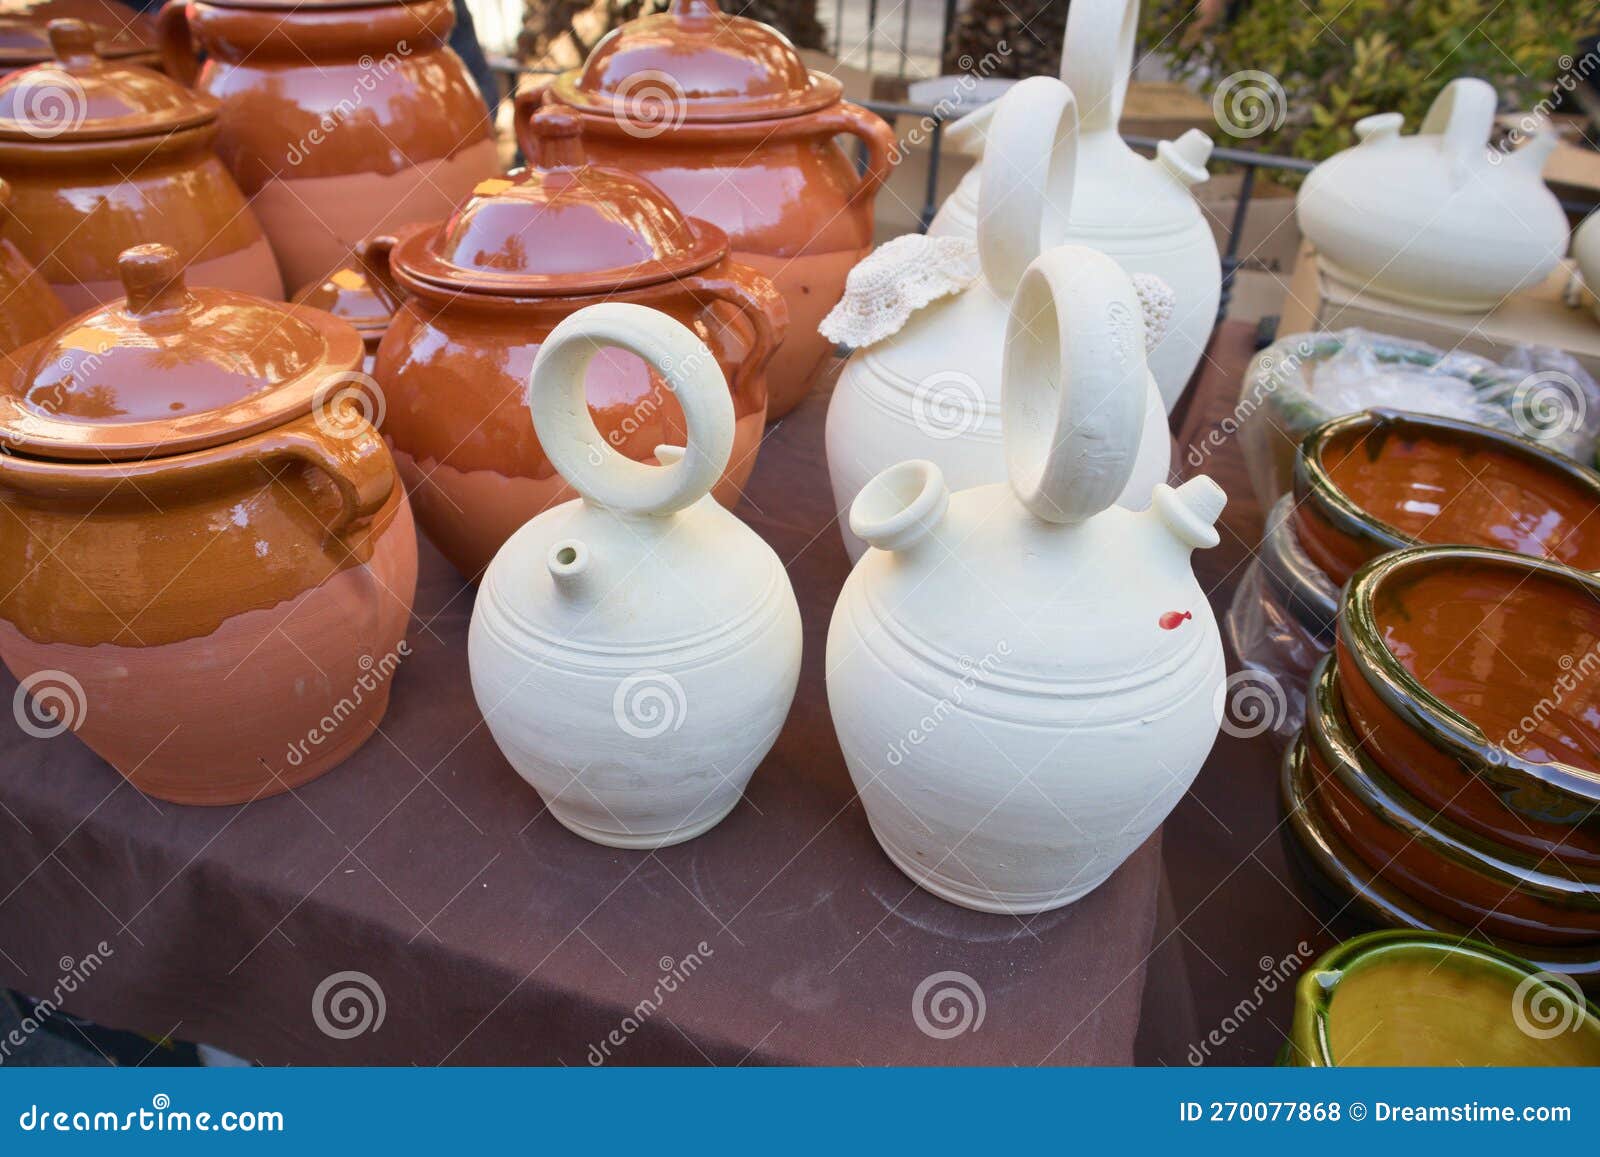 closeup of some botijos and ceramic jugs in a traditional market